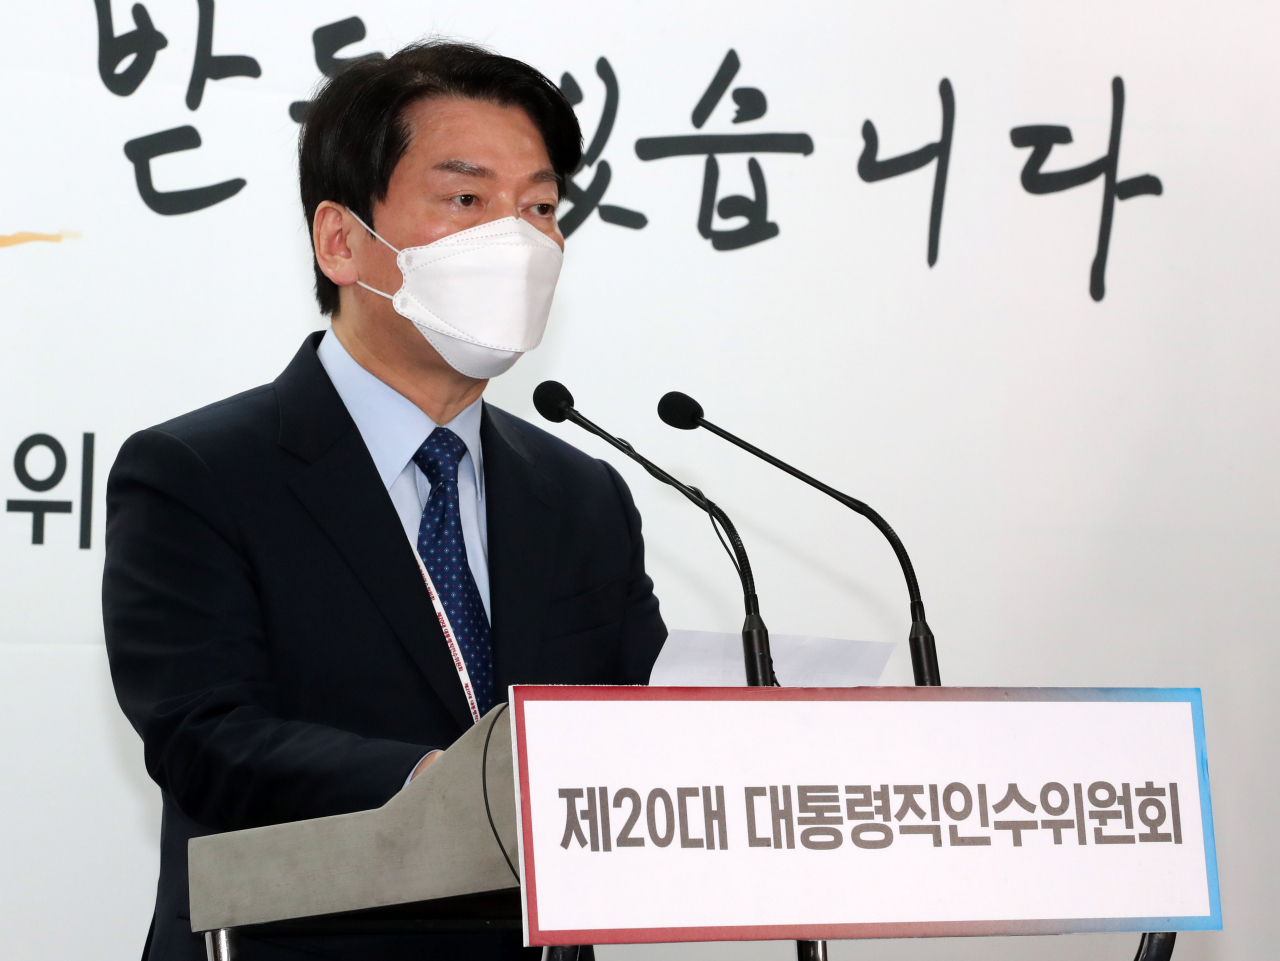 In this file photo, transition team Chairman Ahn Cheol-soo speaks during a news conference on the government reorganization plan of the incoming administration of President-elect Yoon Suk-yeol at the team's headquarters in central Seoul last Thursday. (Yonhap)